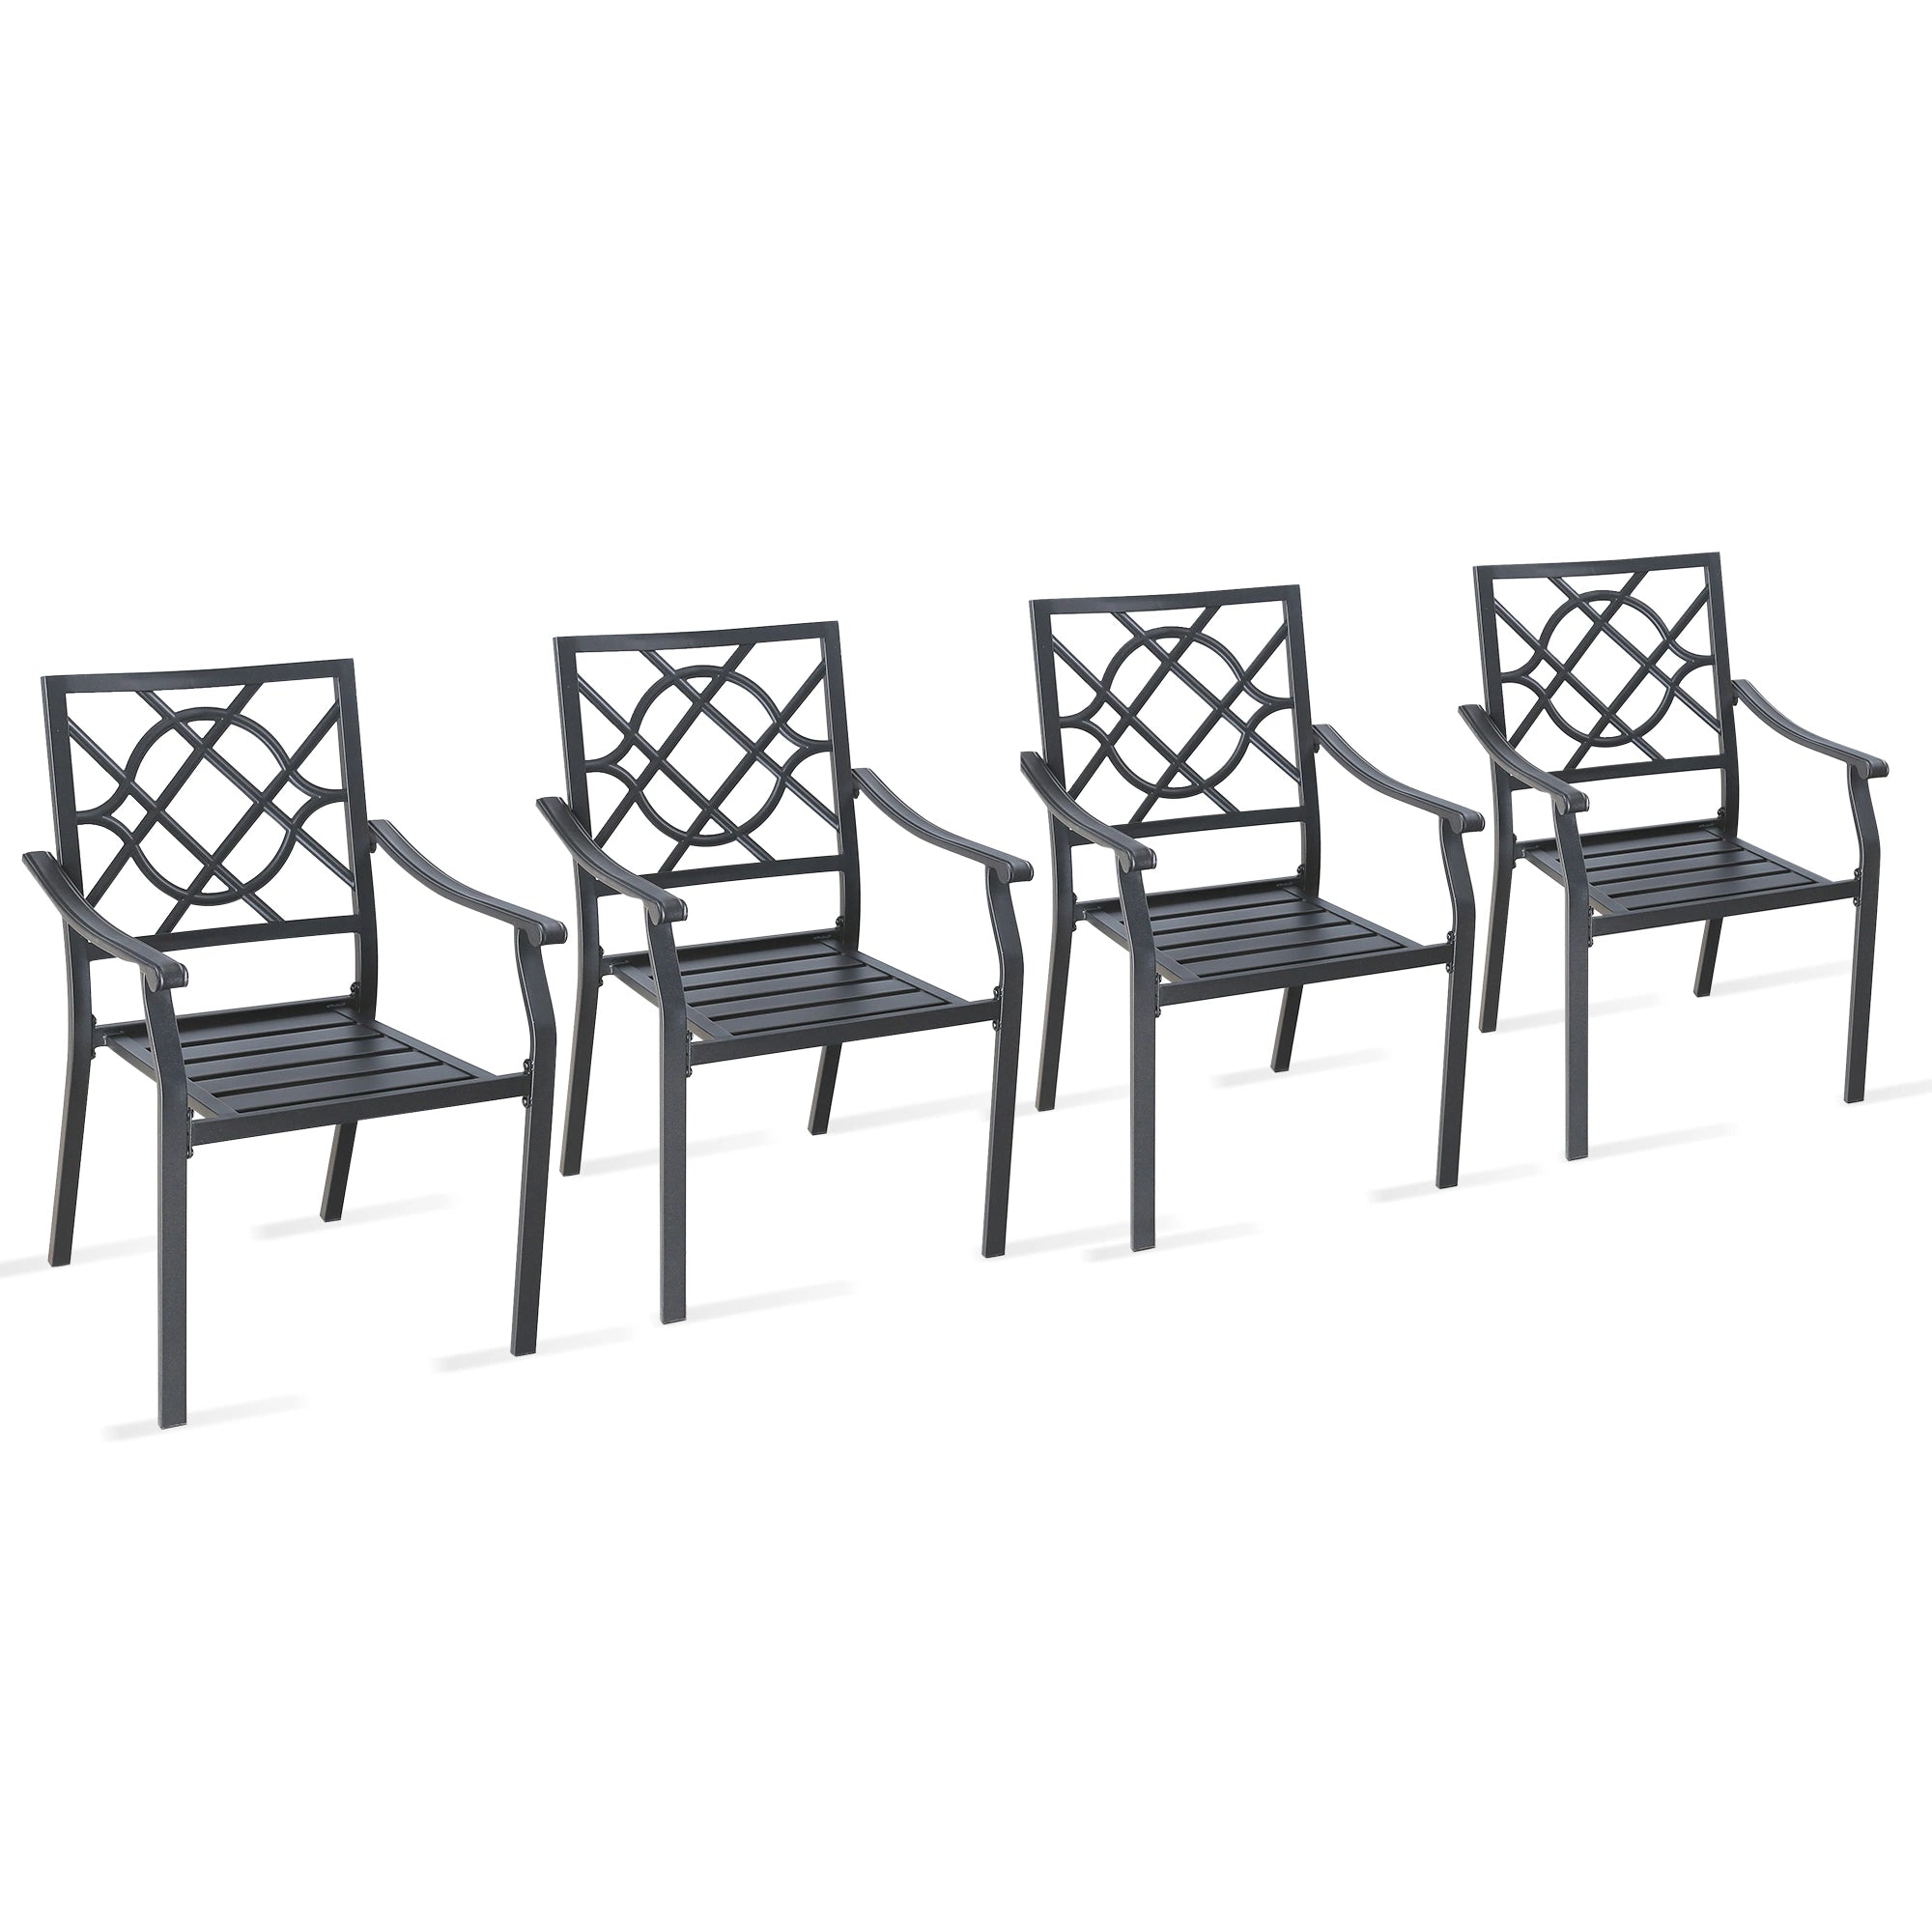 Set of 4 Patio Dining Chairs - Outdoor Furniture Chair Set with Steel Frame and Armrest